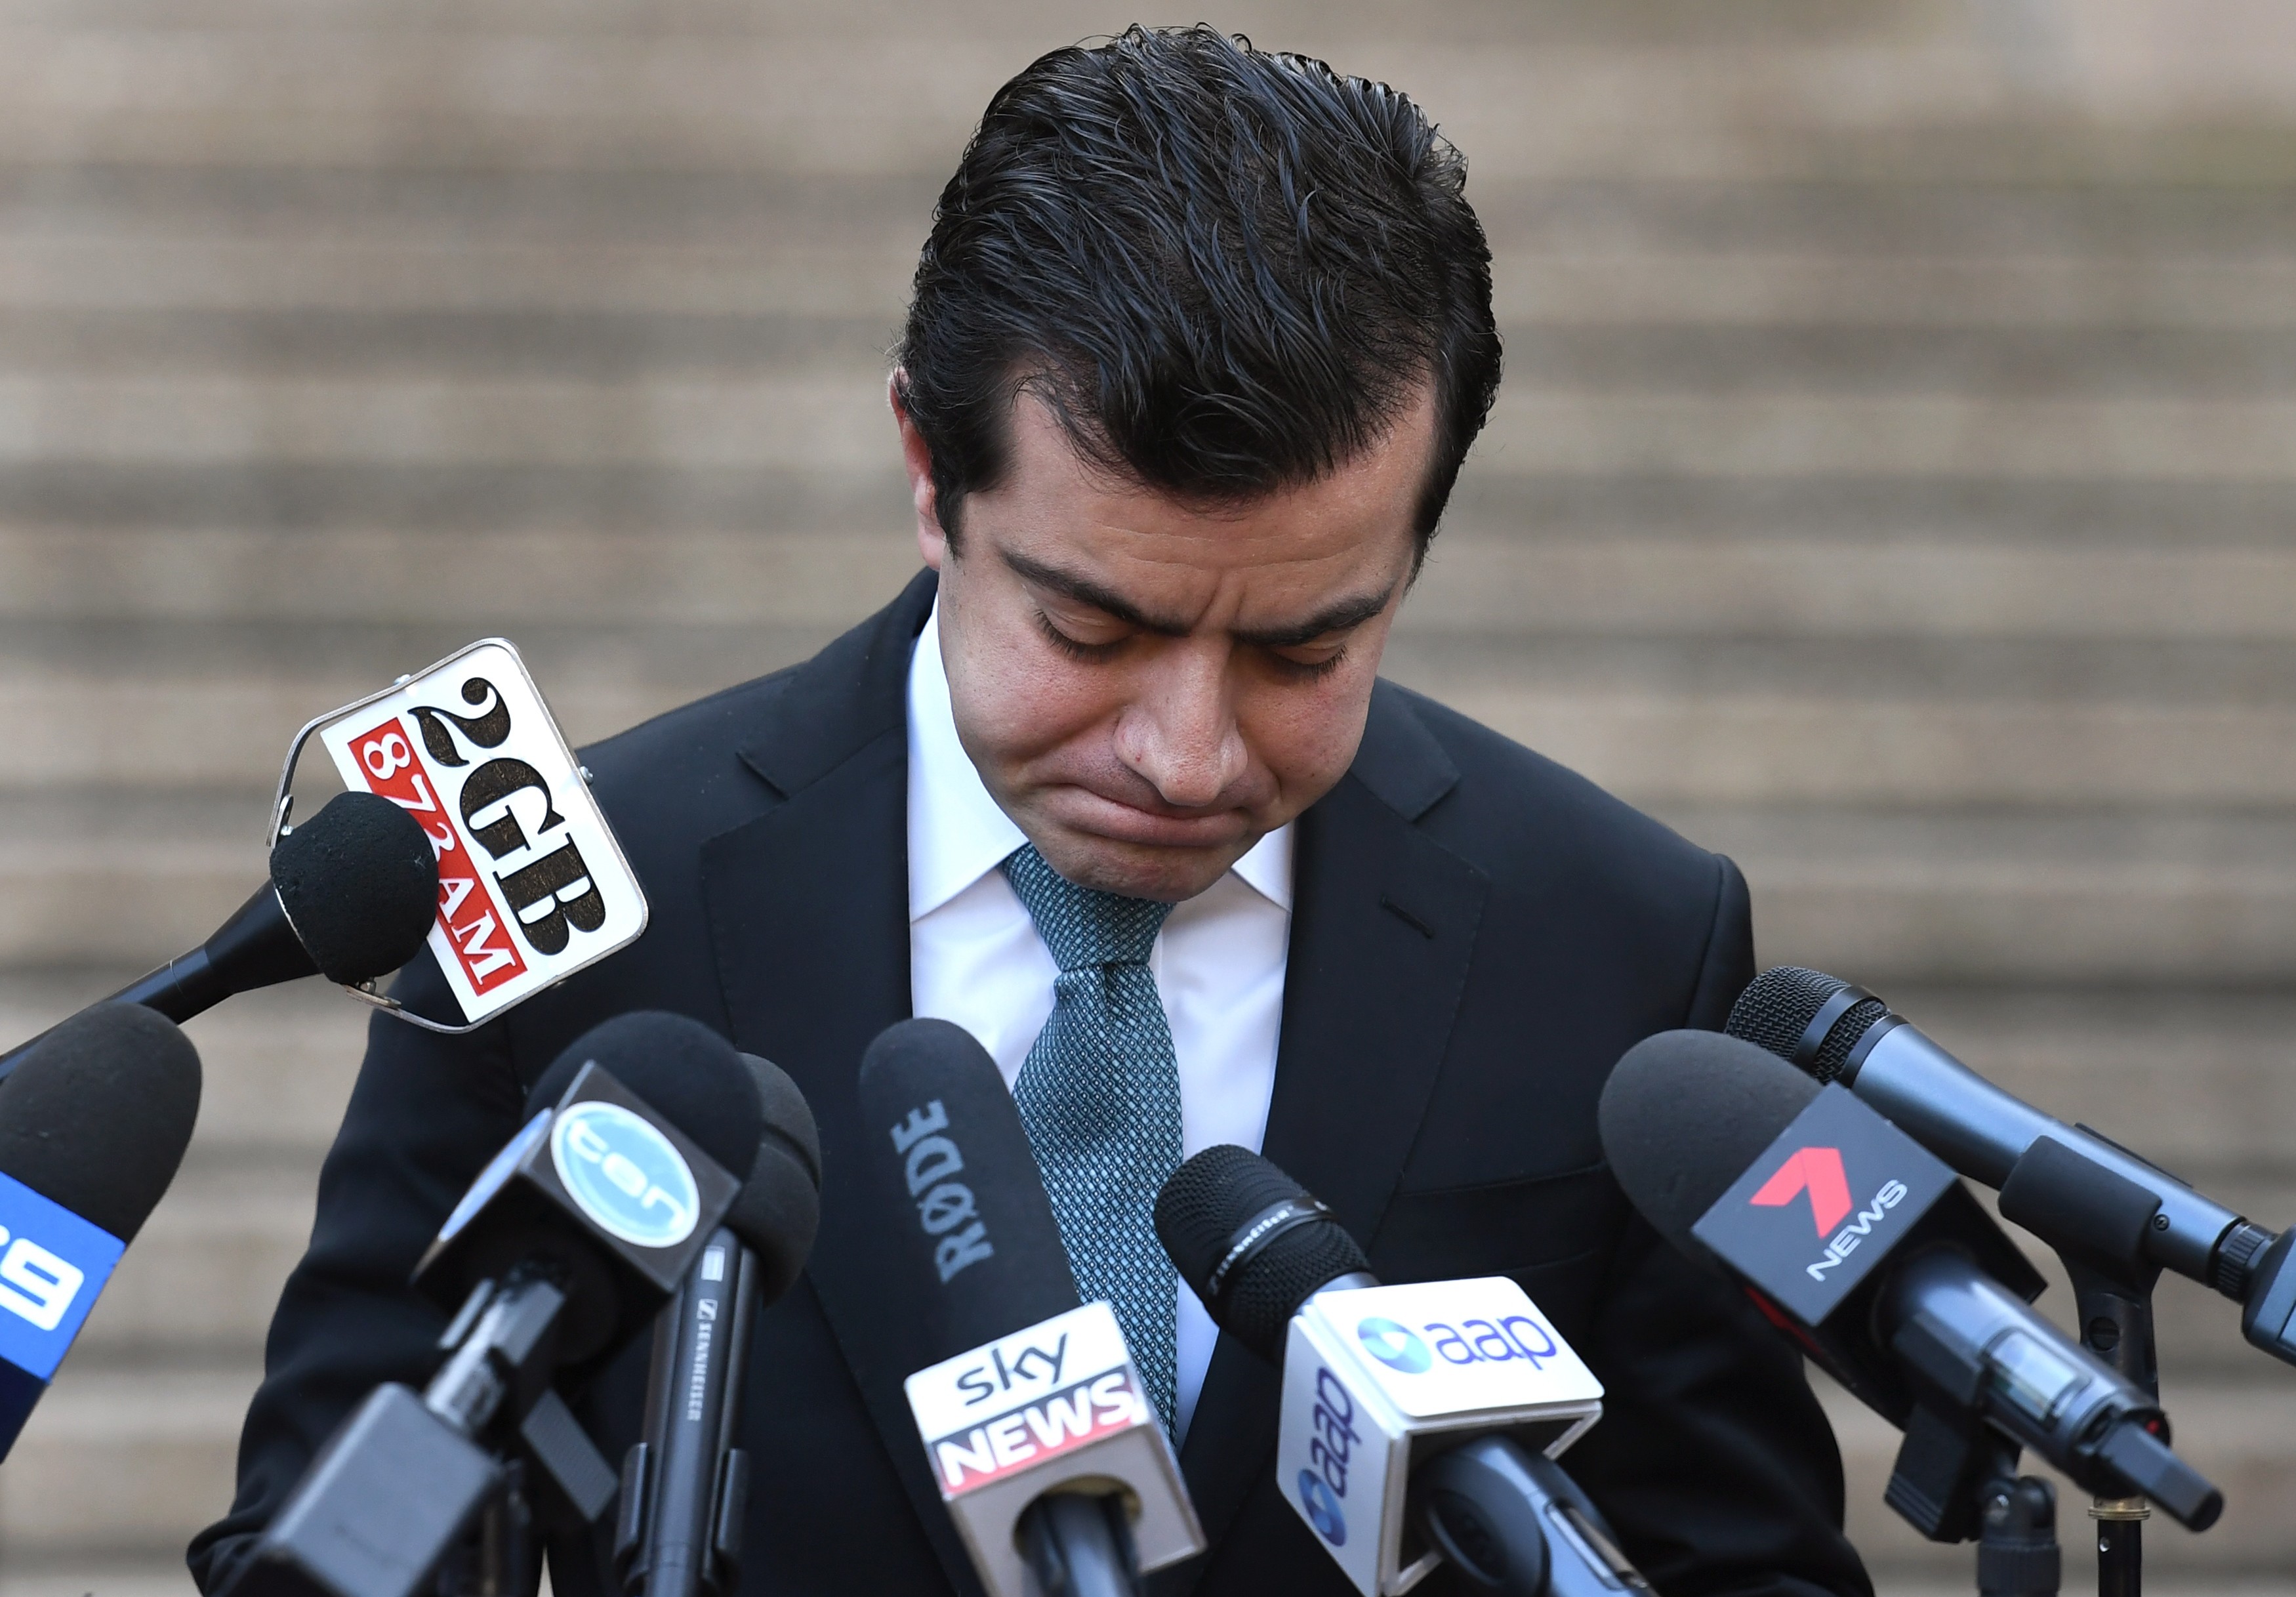 Australian Labor Party senator Sam Dastyari speaks with the media in Sydney. Dastyari quit parliament on December 12 over his links to China in a scandal that coincided with Canberra proposing new foreign interference laws. Photo: AFP